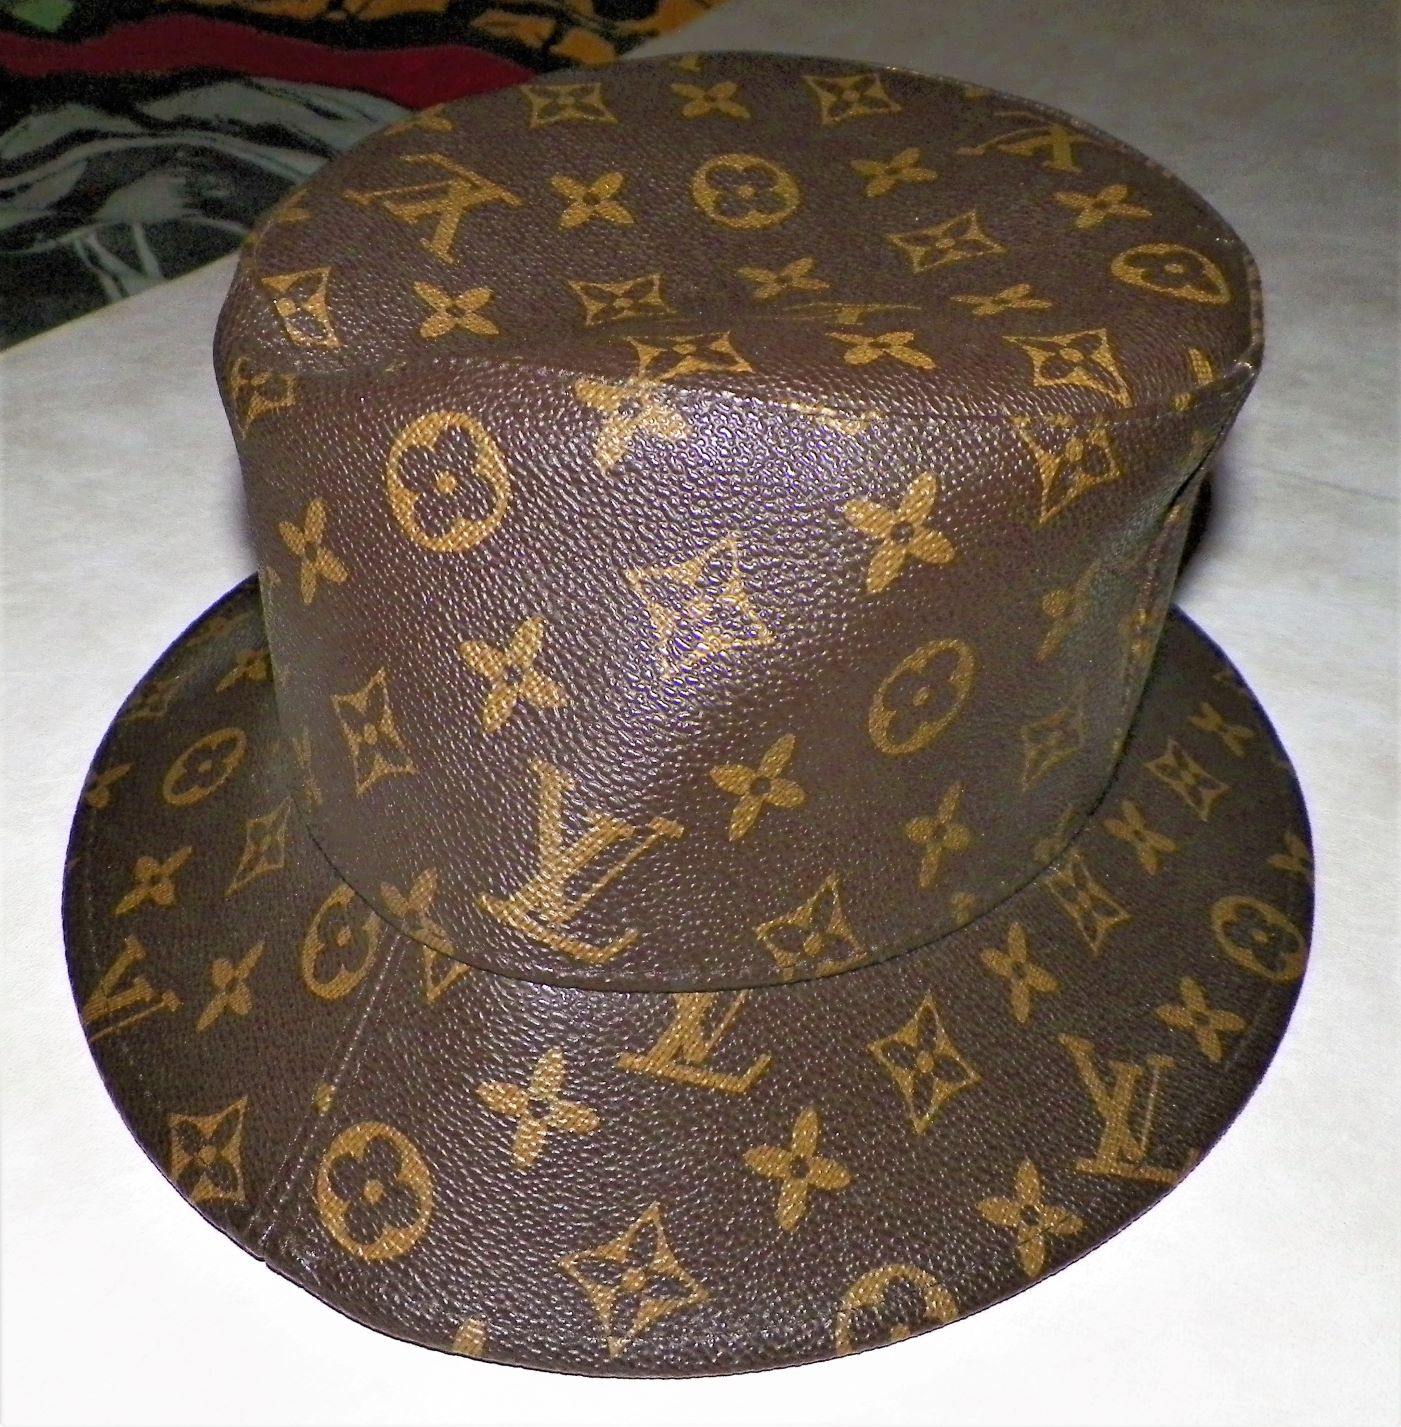 Is this Louis Vuitton bucket hat real? | Antiques Board